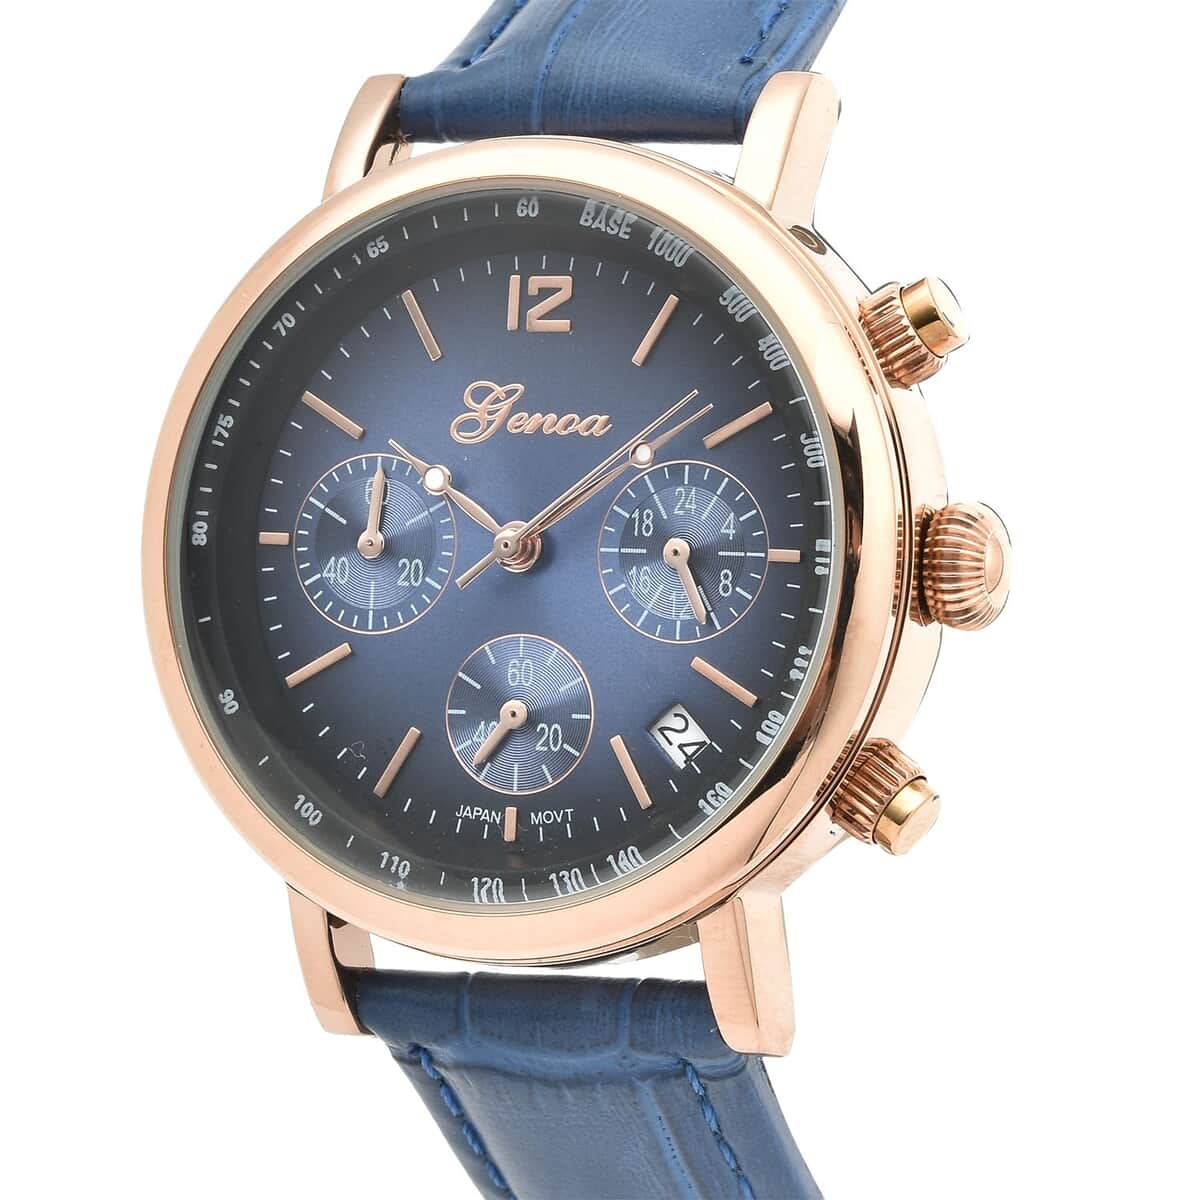 Genoa Japanese Movement Multi Functional Chronographic Dial Watch with Blue Leather Strap (38mm) (7.-8.5Inch) image number 3